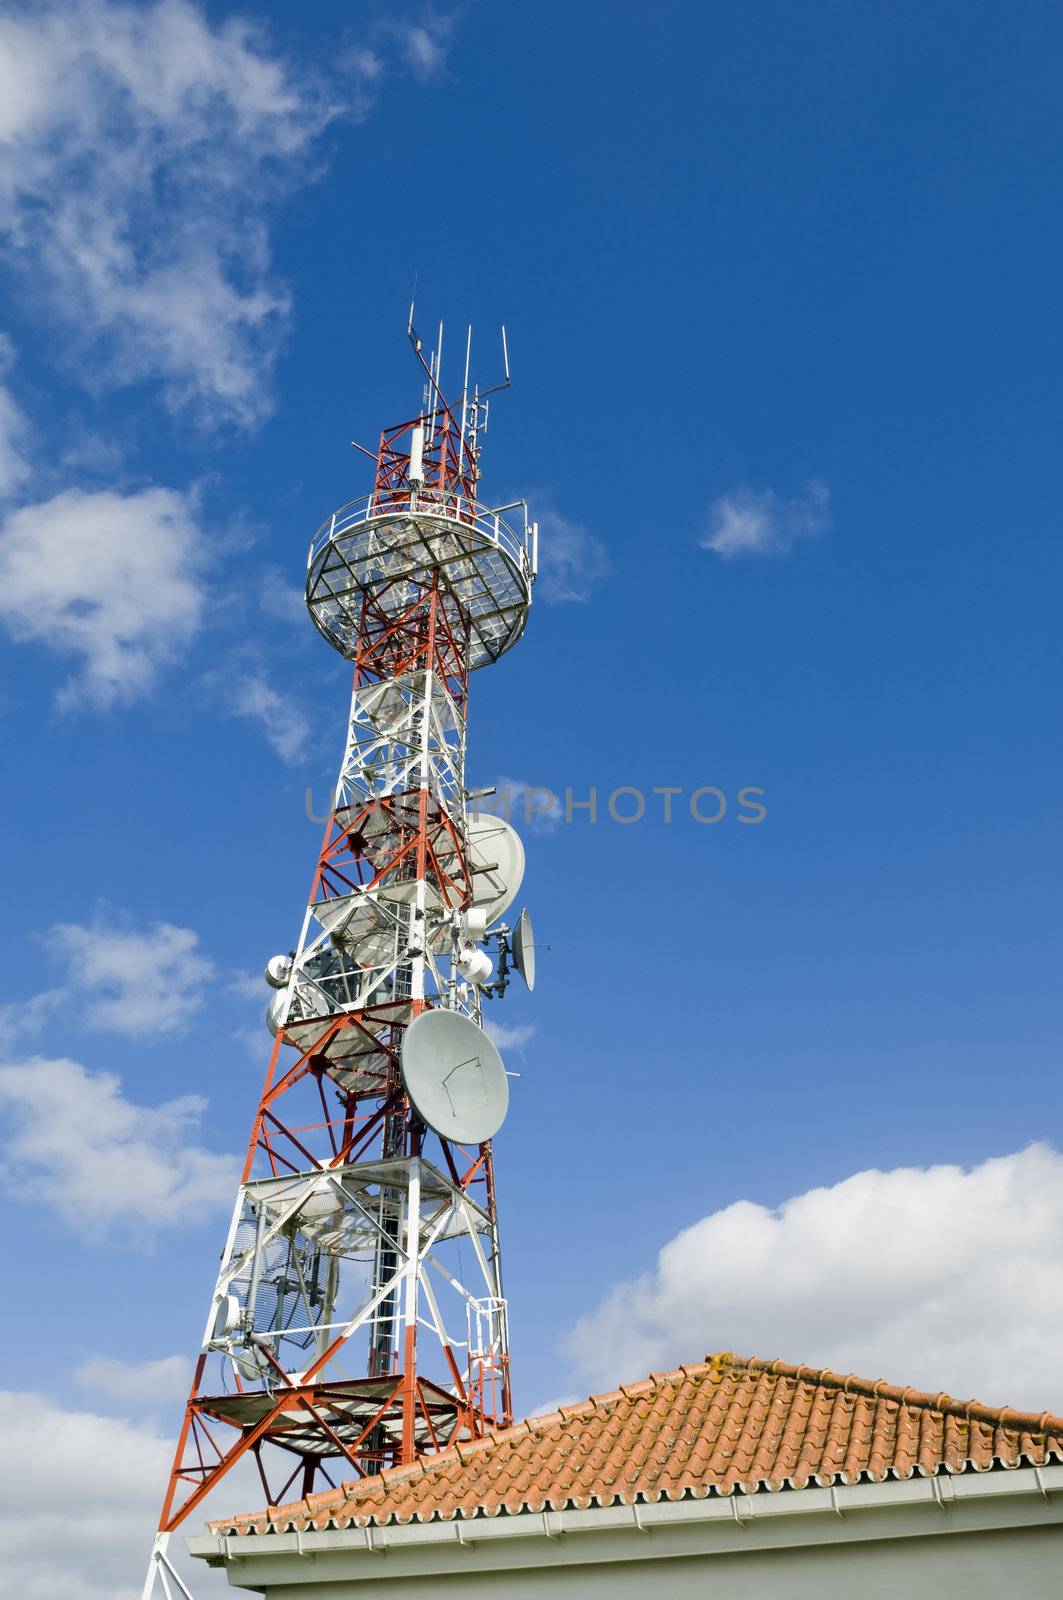 Radio communications station and tower with various types of antennas